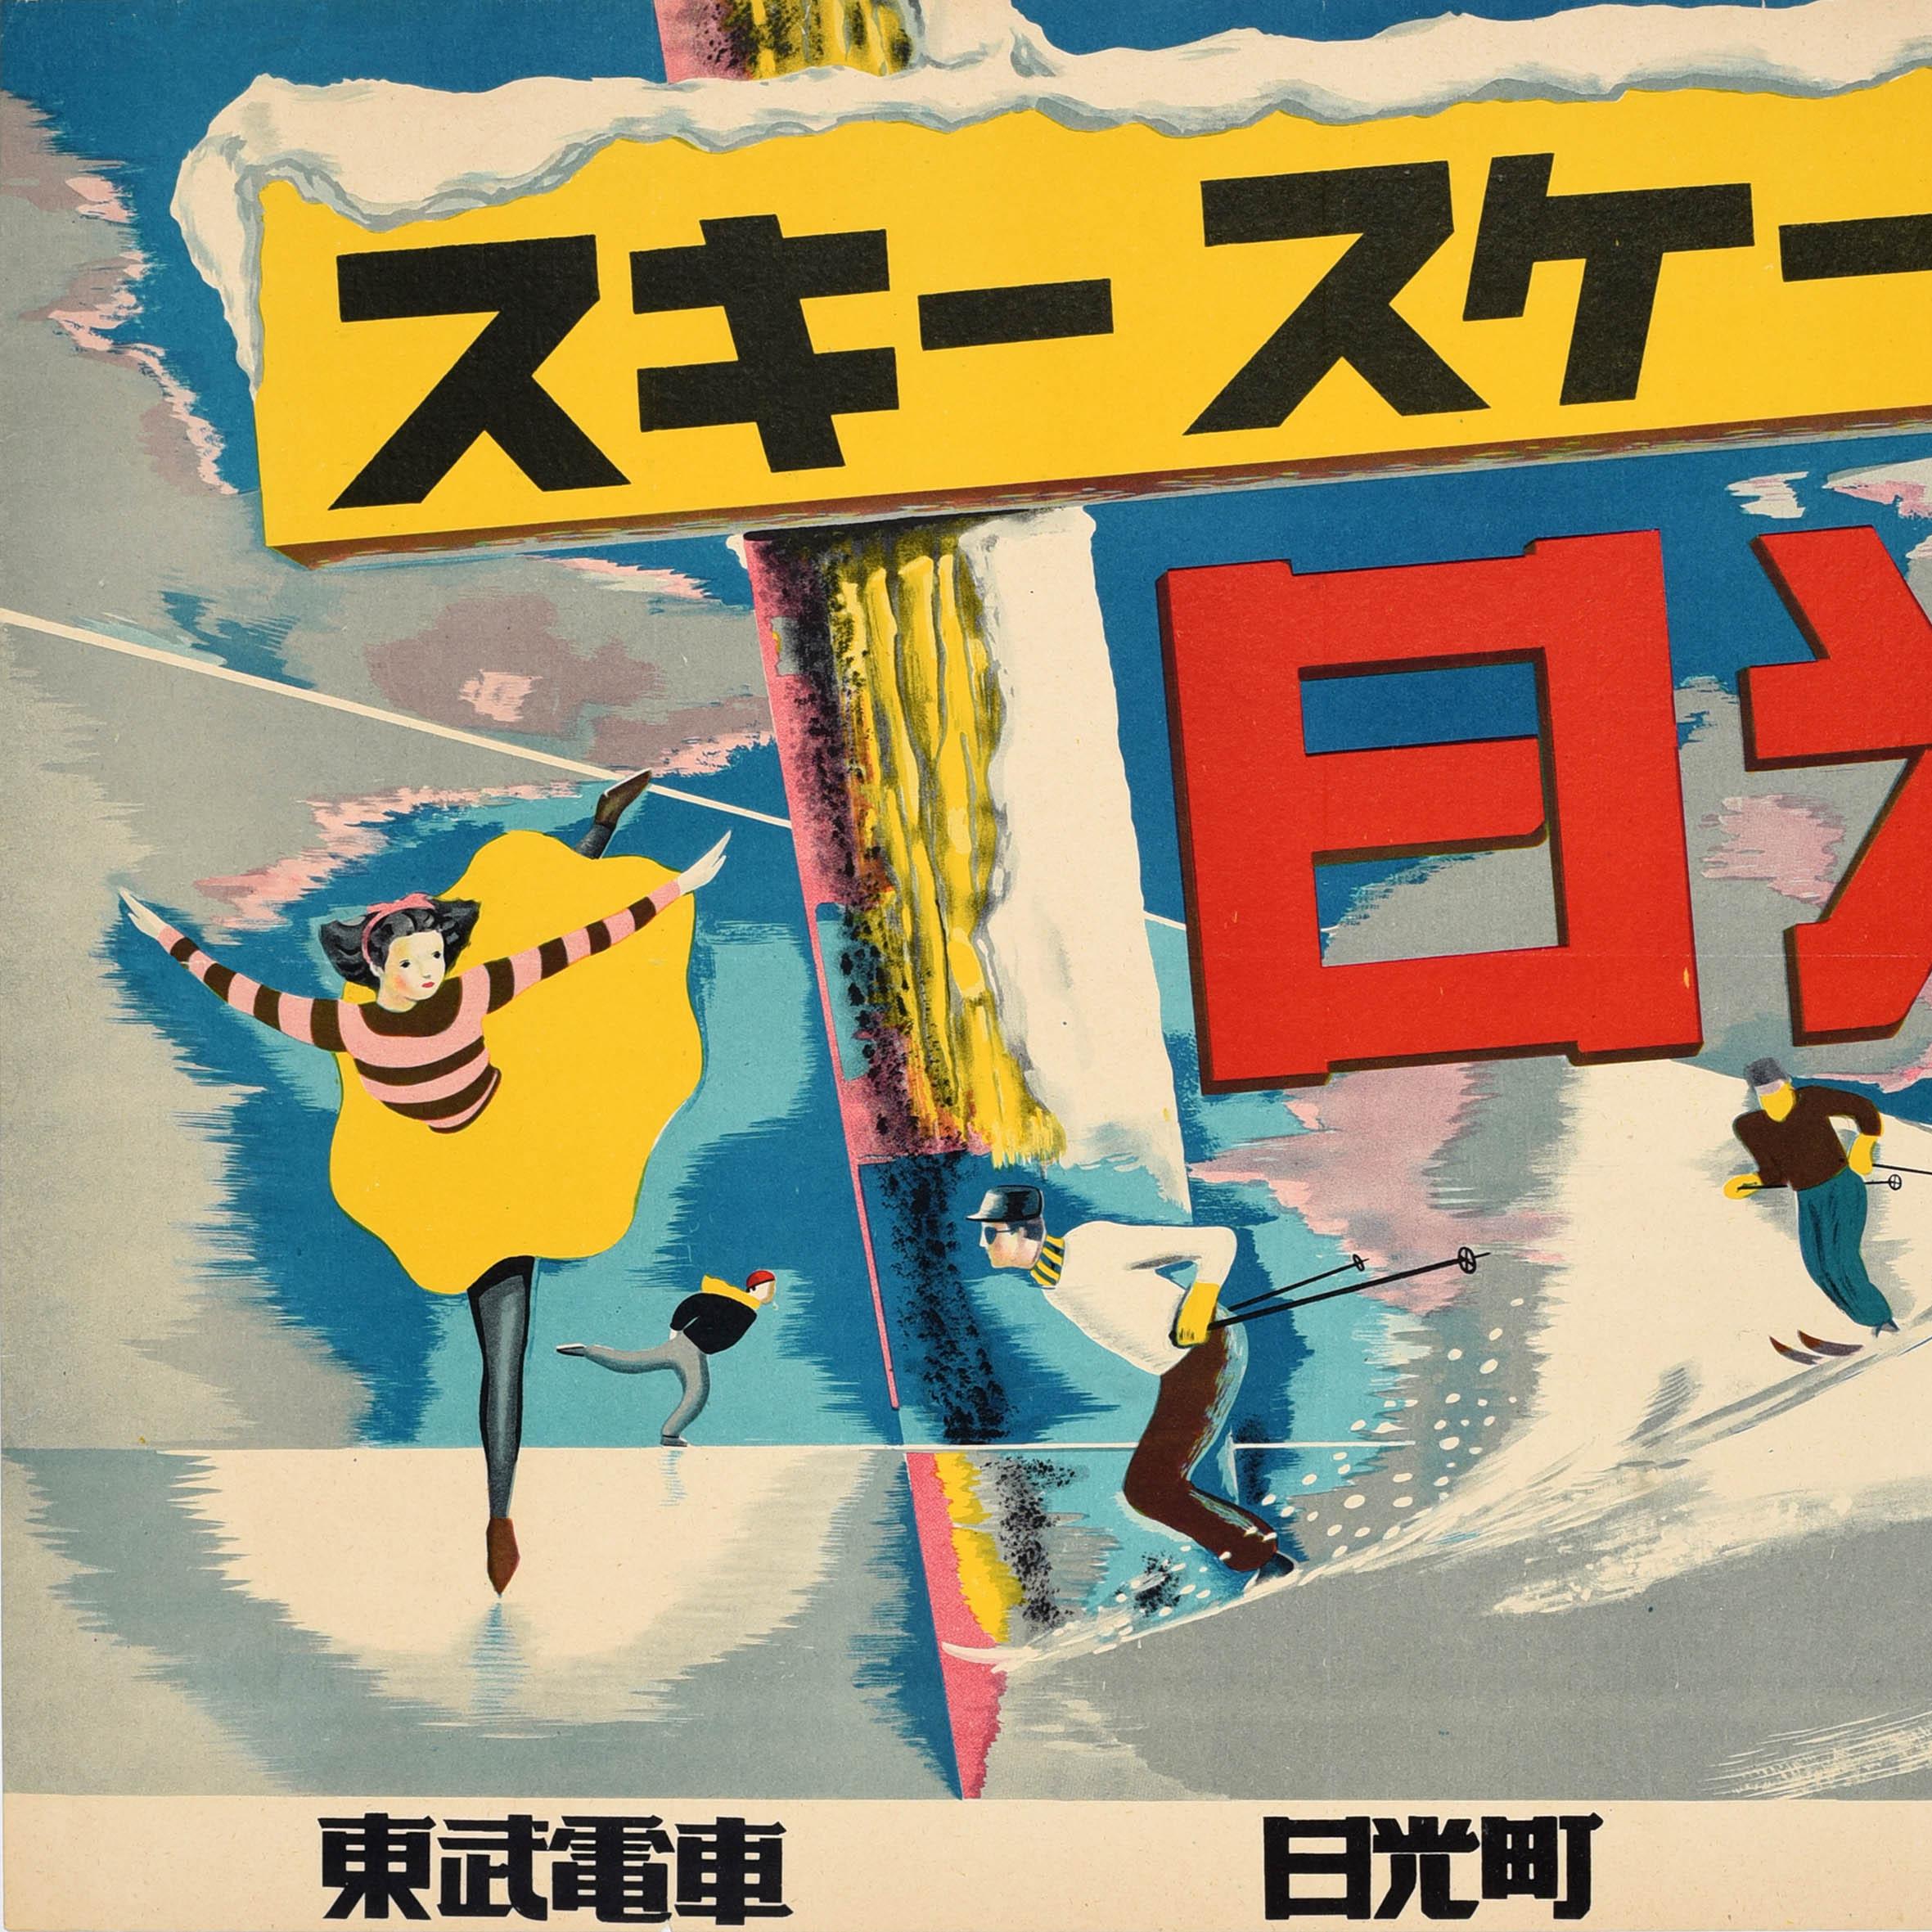 Original vintage winter sport railway travel poster advertising the Tobu Train to Nikko - Ski Skating Sunshine - featuring colourful images of ice skaters and skiers skiing downhill in the snow with the bold Japanese characters on a wooden signpost